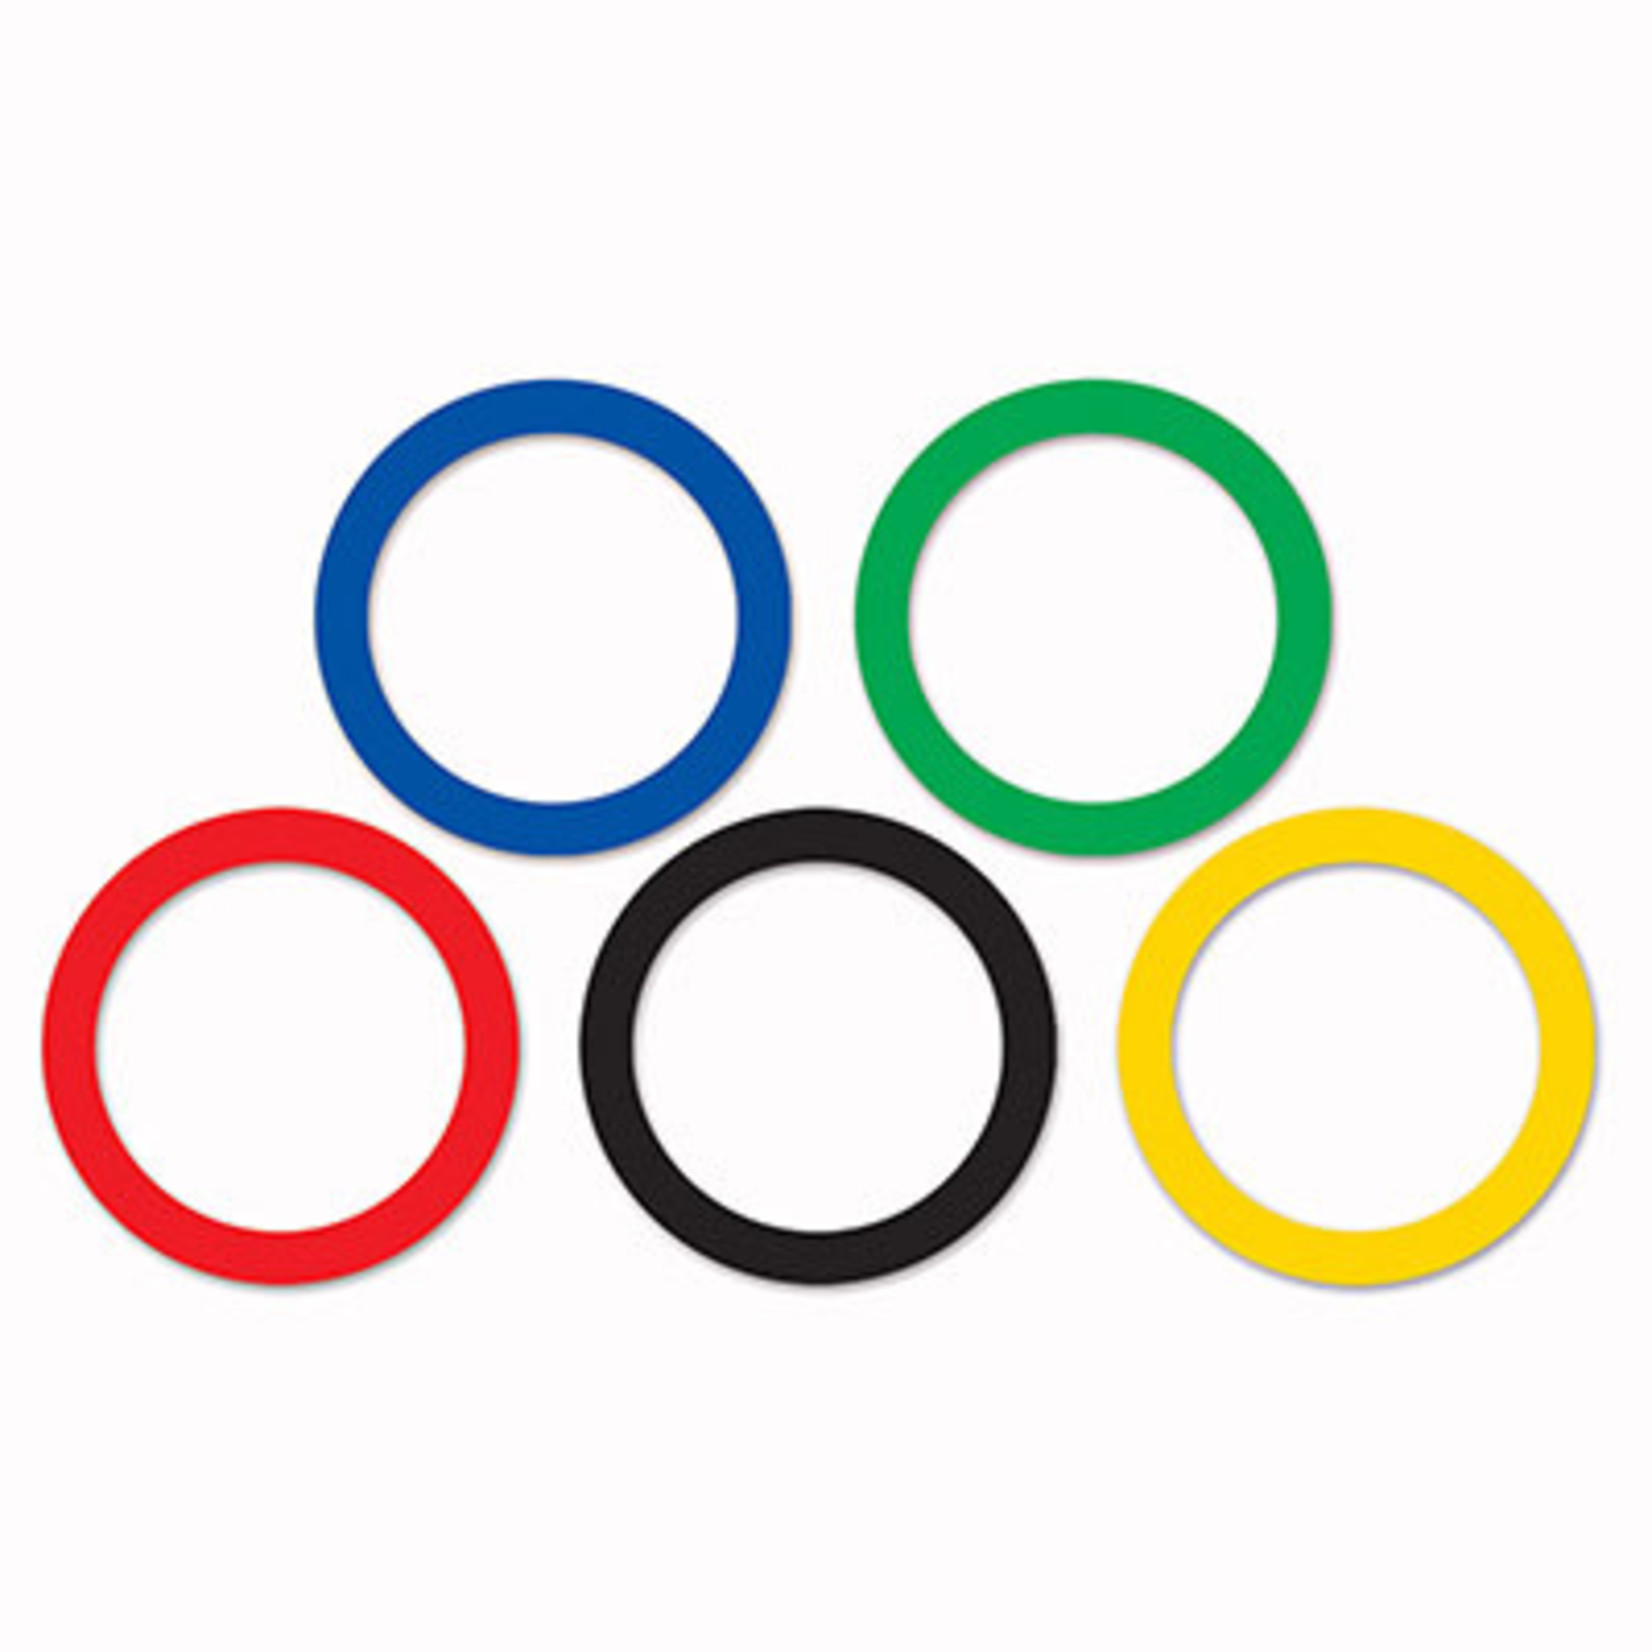 Beistle Large Olympic Party Rings - 15ct.